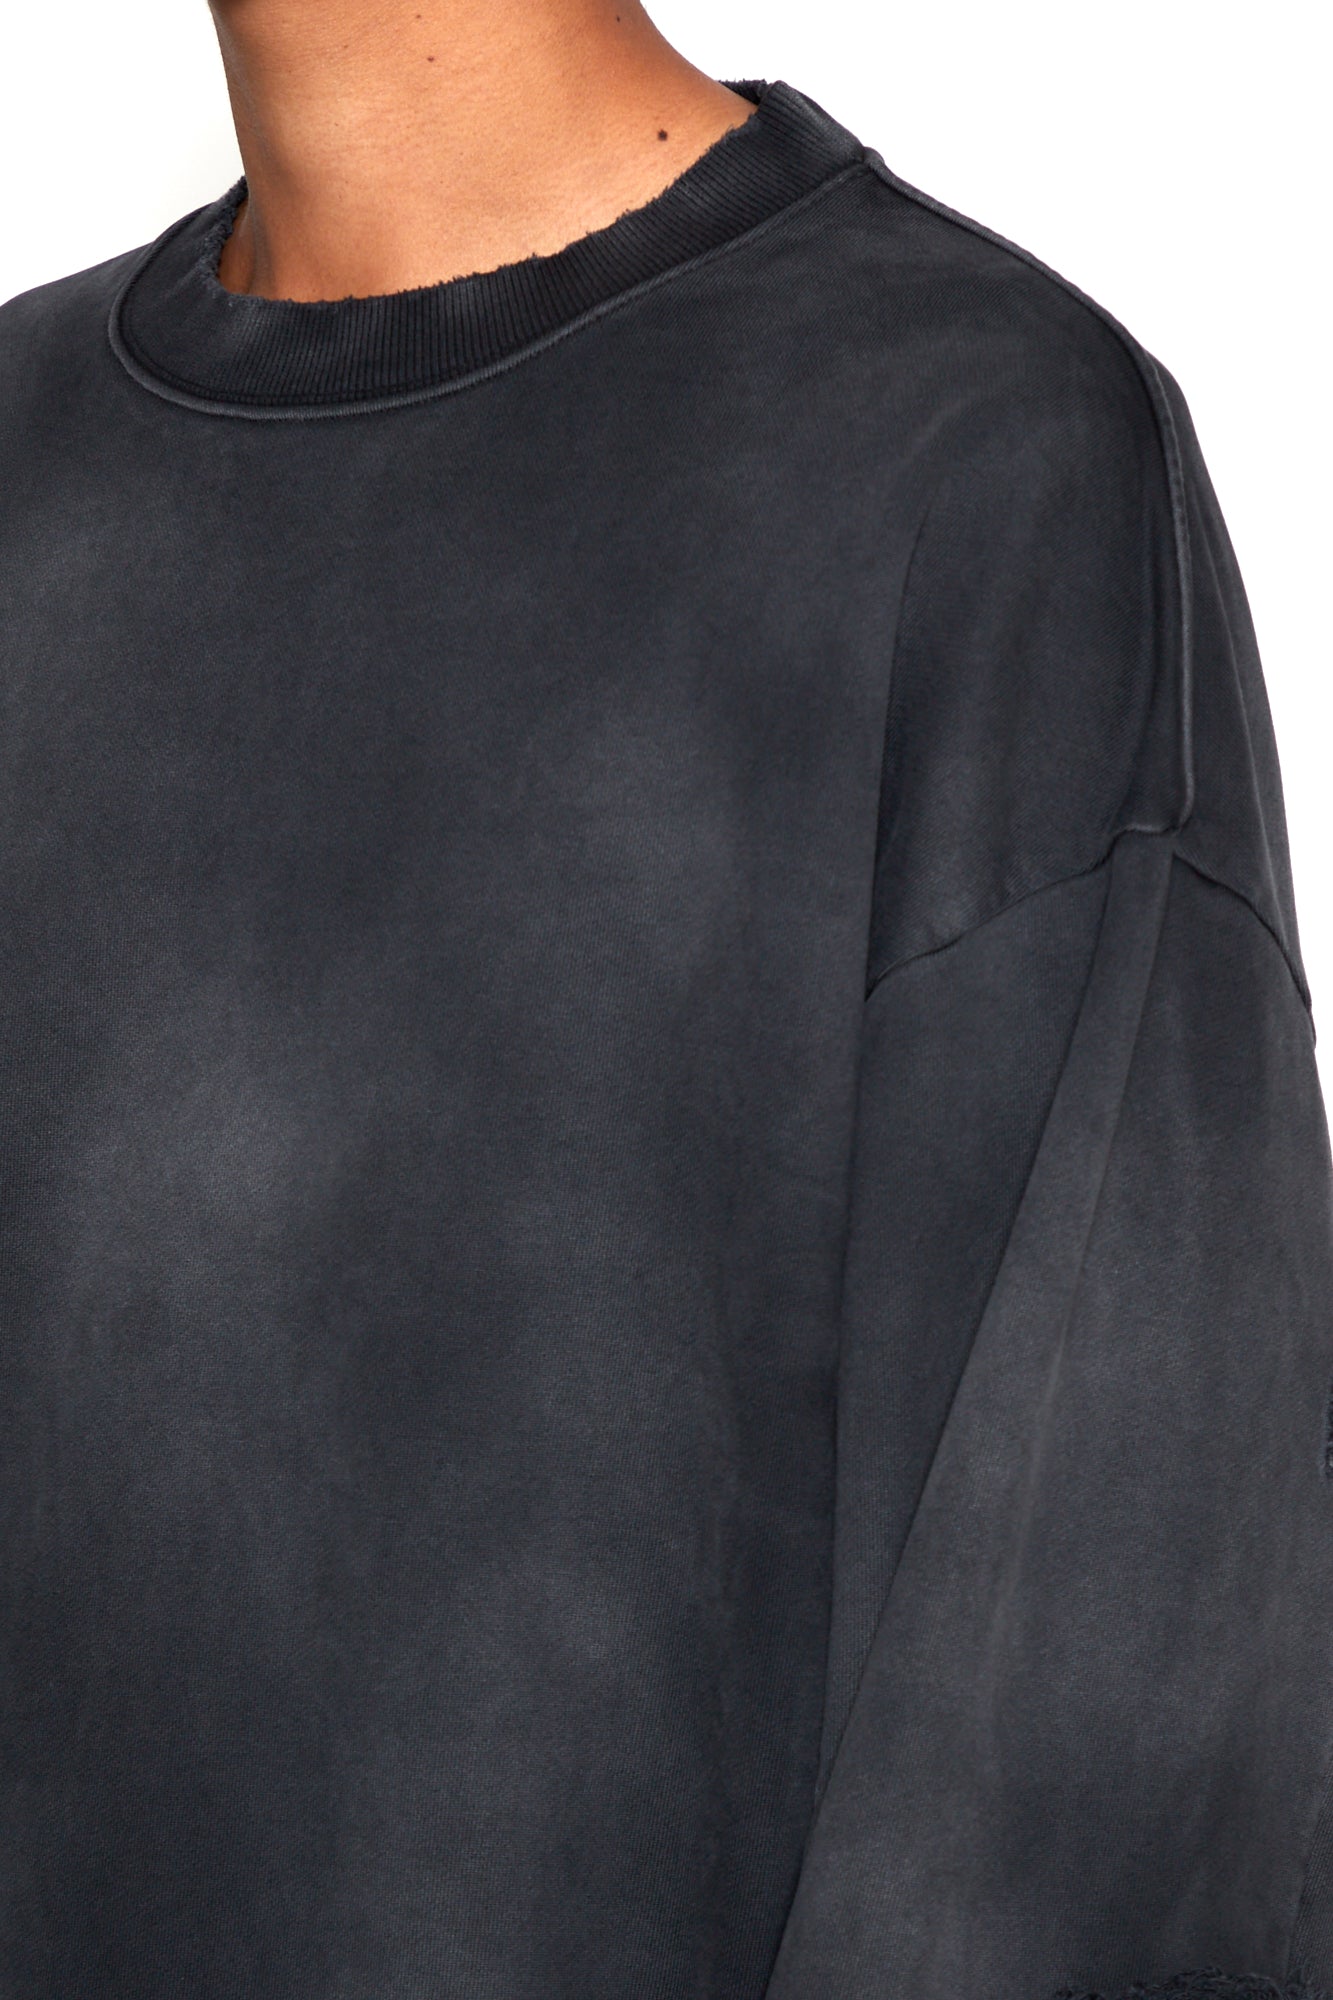 Load image into Gallery viewer, BLACK WASHED DISTRESSED AGING SWEATSHIRT
